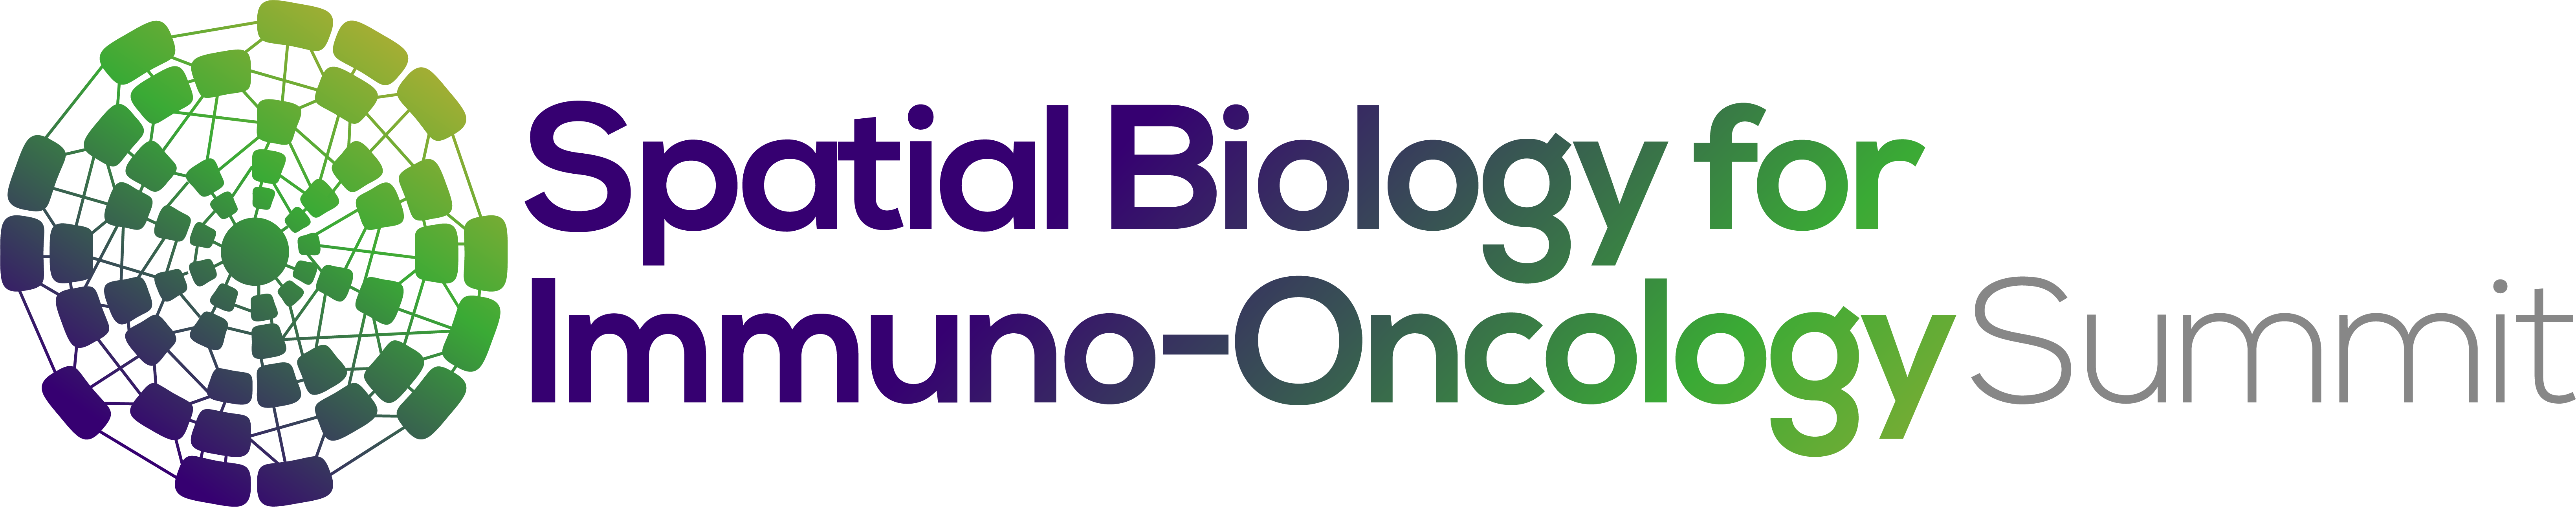 33096 Spatial Biology for Immuno-Oncology Summit logo